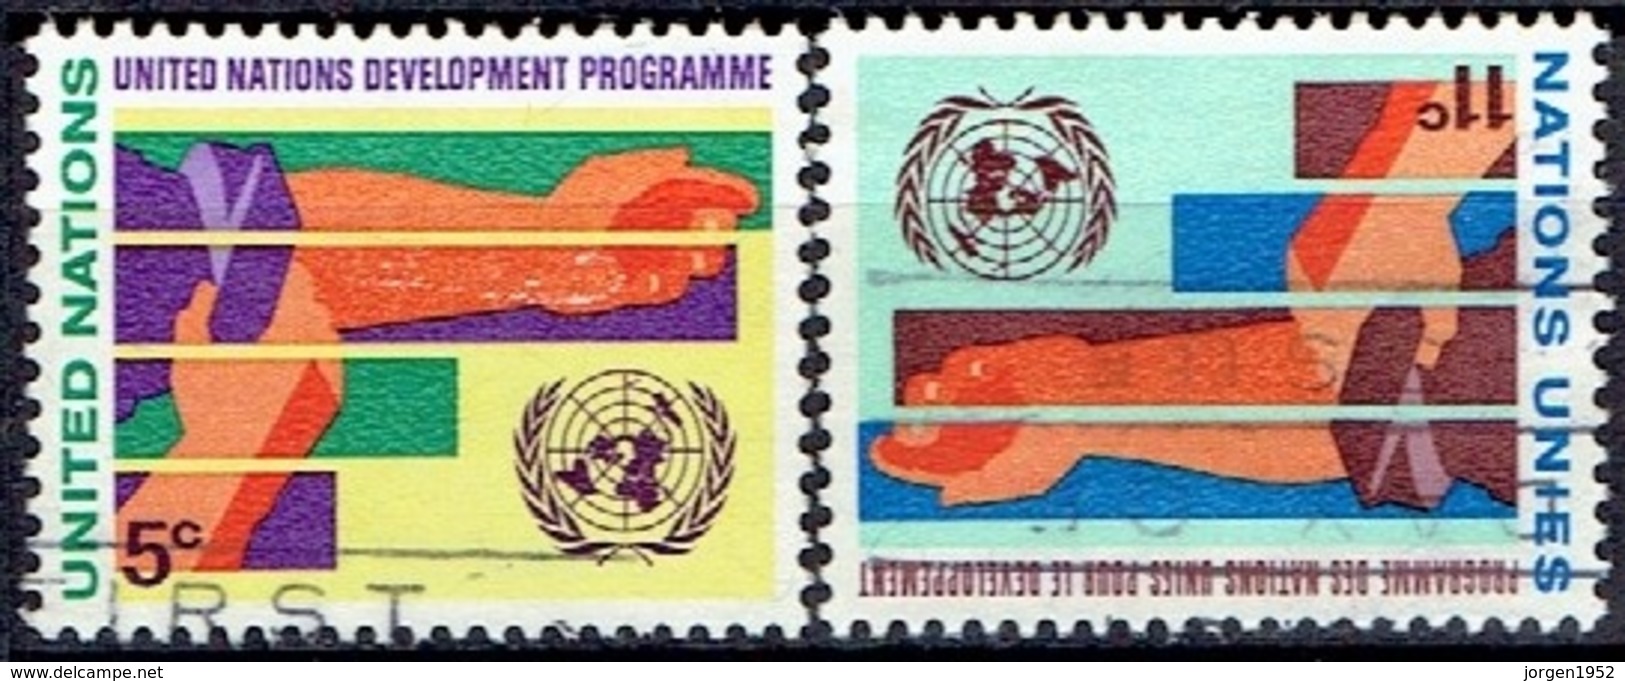 UNITED NATIONS # NEW YORK FROM 1967 STAMPWORLD 174-75 - Usados